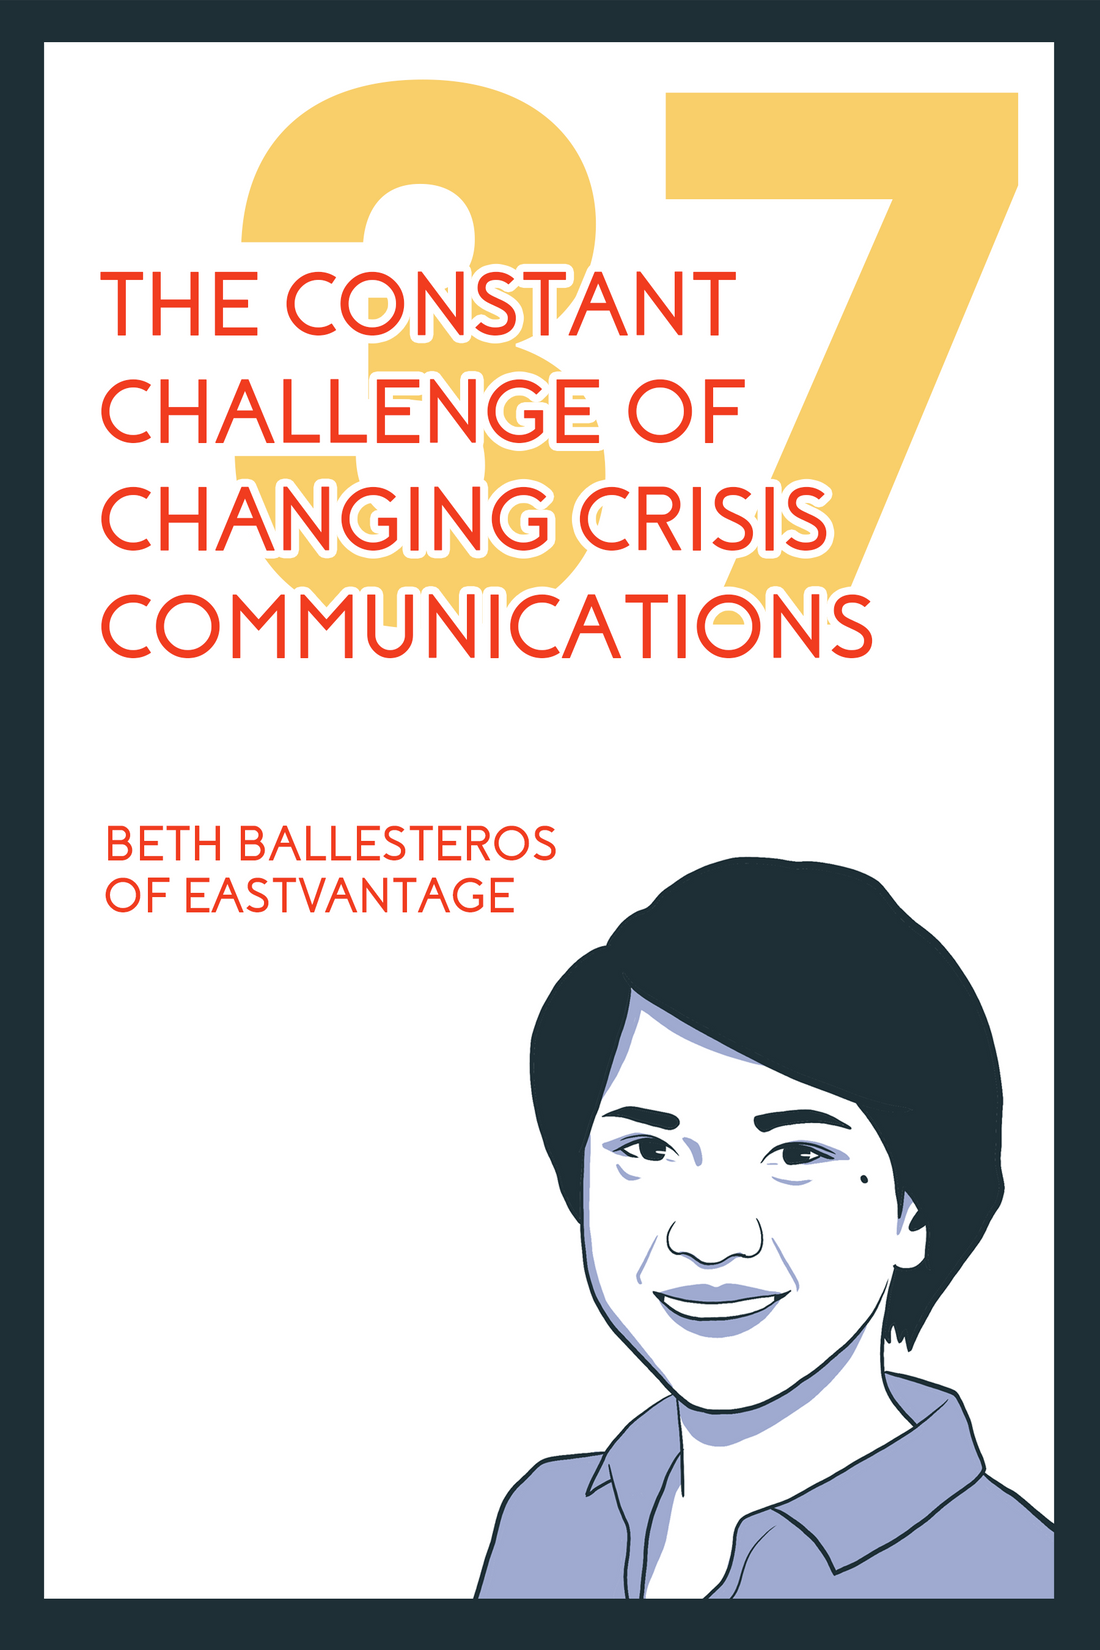 The Evangelists’ Chapter 37, entitled: “The Constant Challenge of Changing Crisis Communications'' featuring Beth Ballesteros, the Vice President of Growth of Eastvantage.